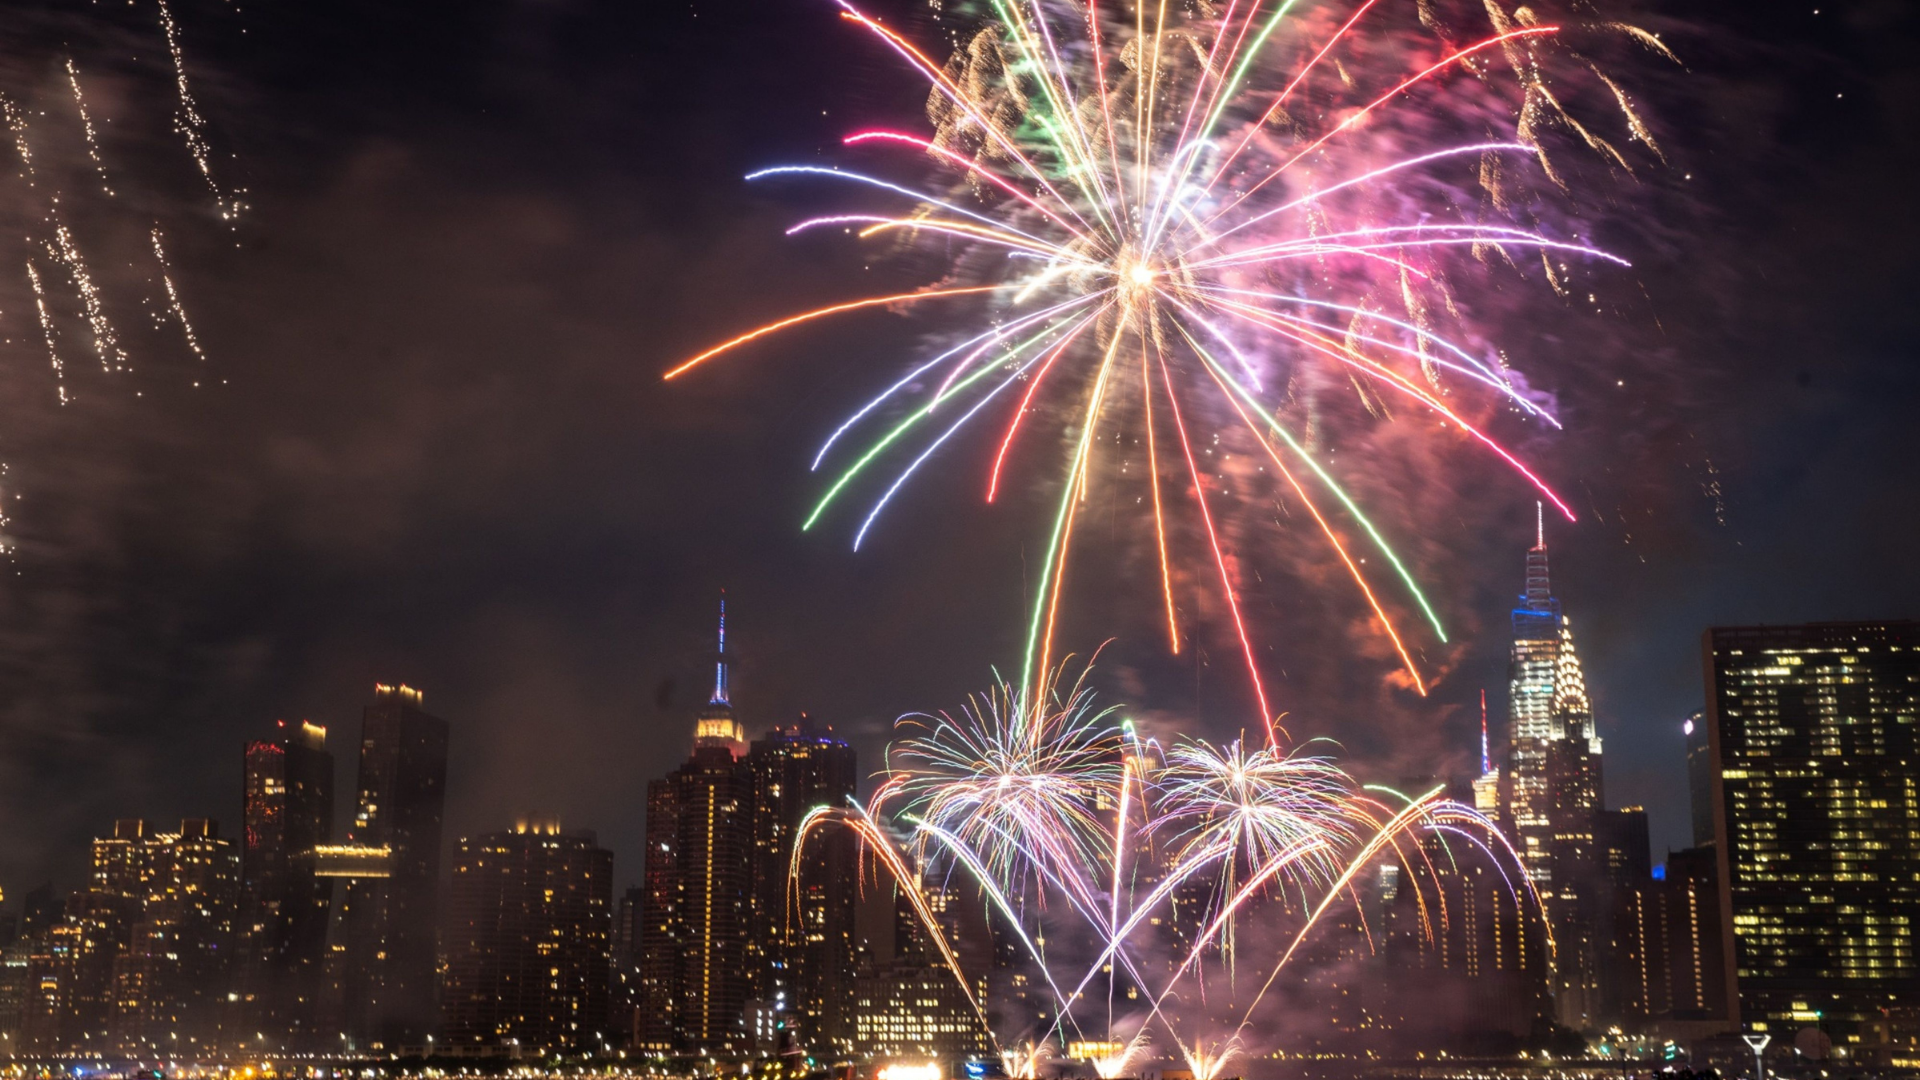 World's Top 5 Firework Displays Epic Nights: The Global Guide to the Best New Year's Eve Firework Displays